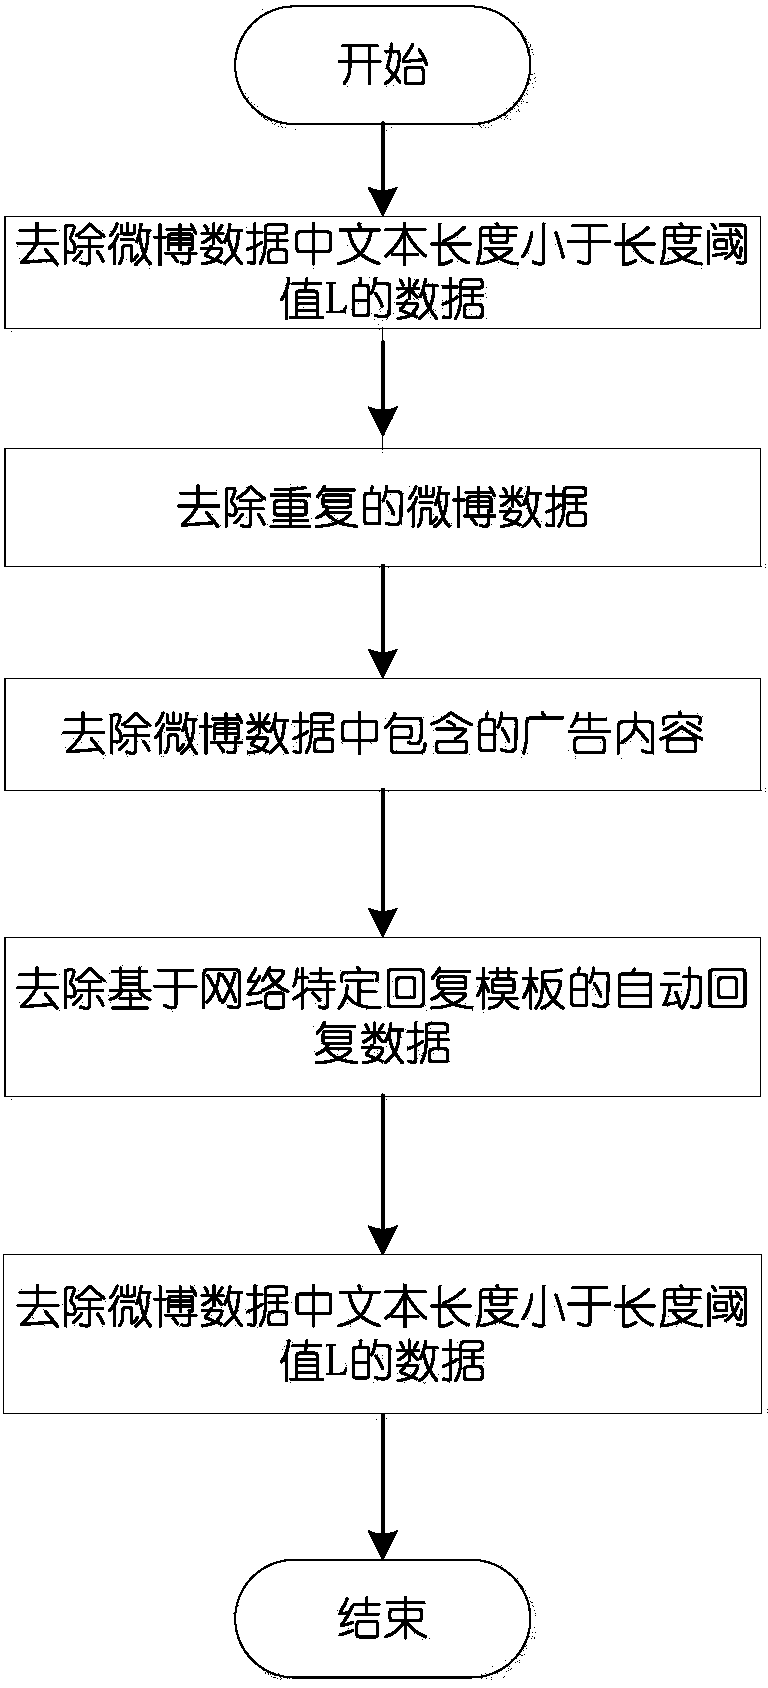 Microblog information filtering method based on multi-information fusion